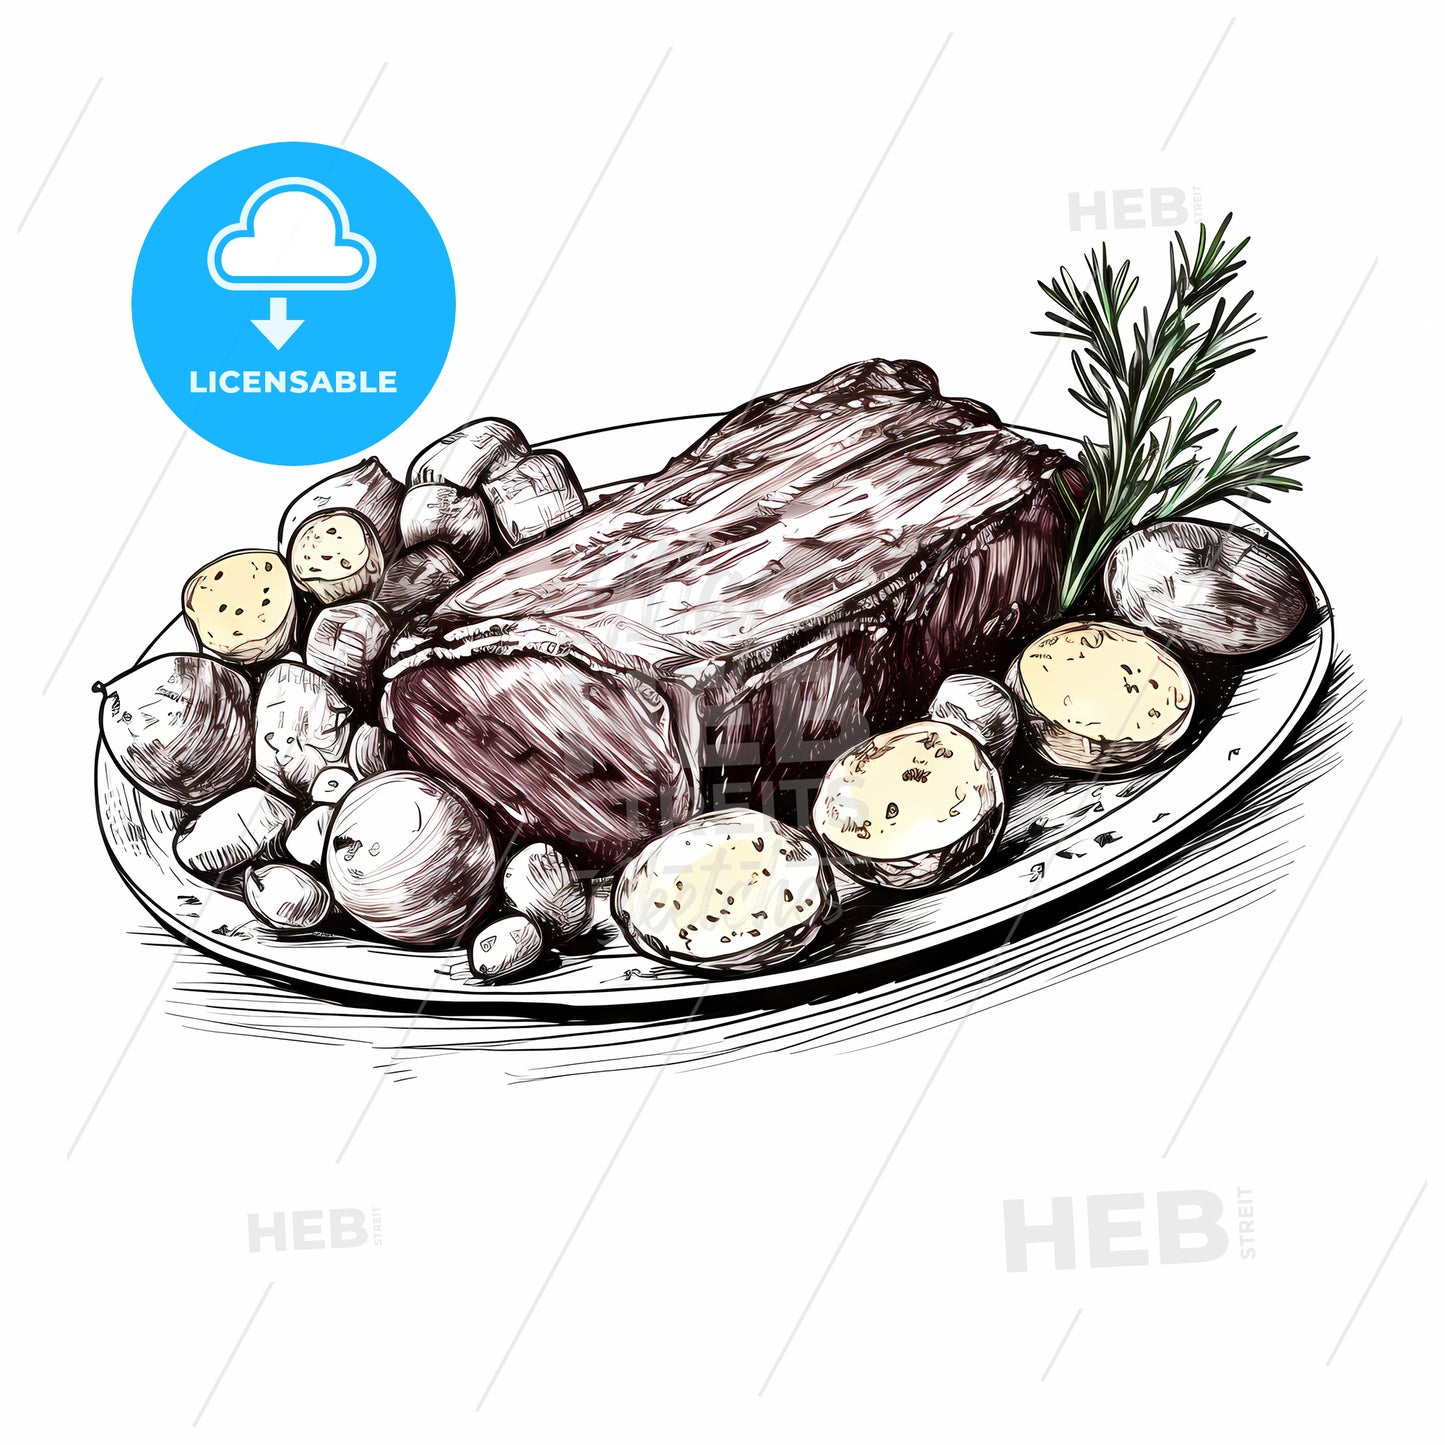 Plate Of Meat And Potatoes